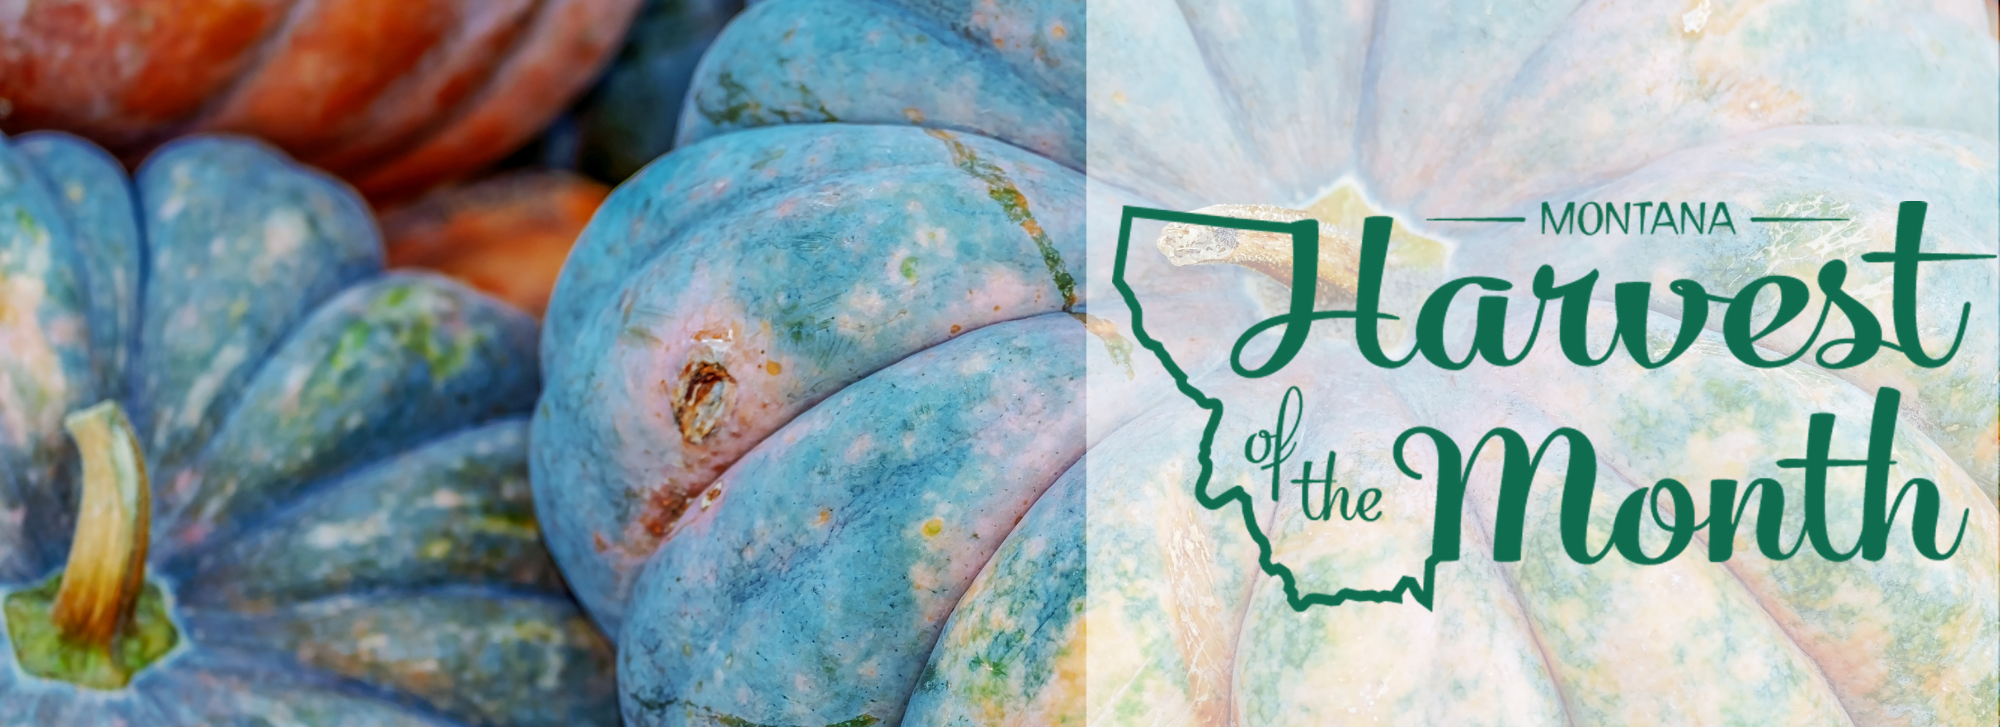 Enjoy winter squash as this month's Harvest of the Month! 